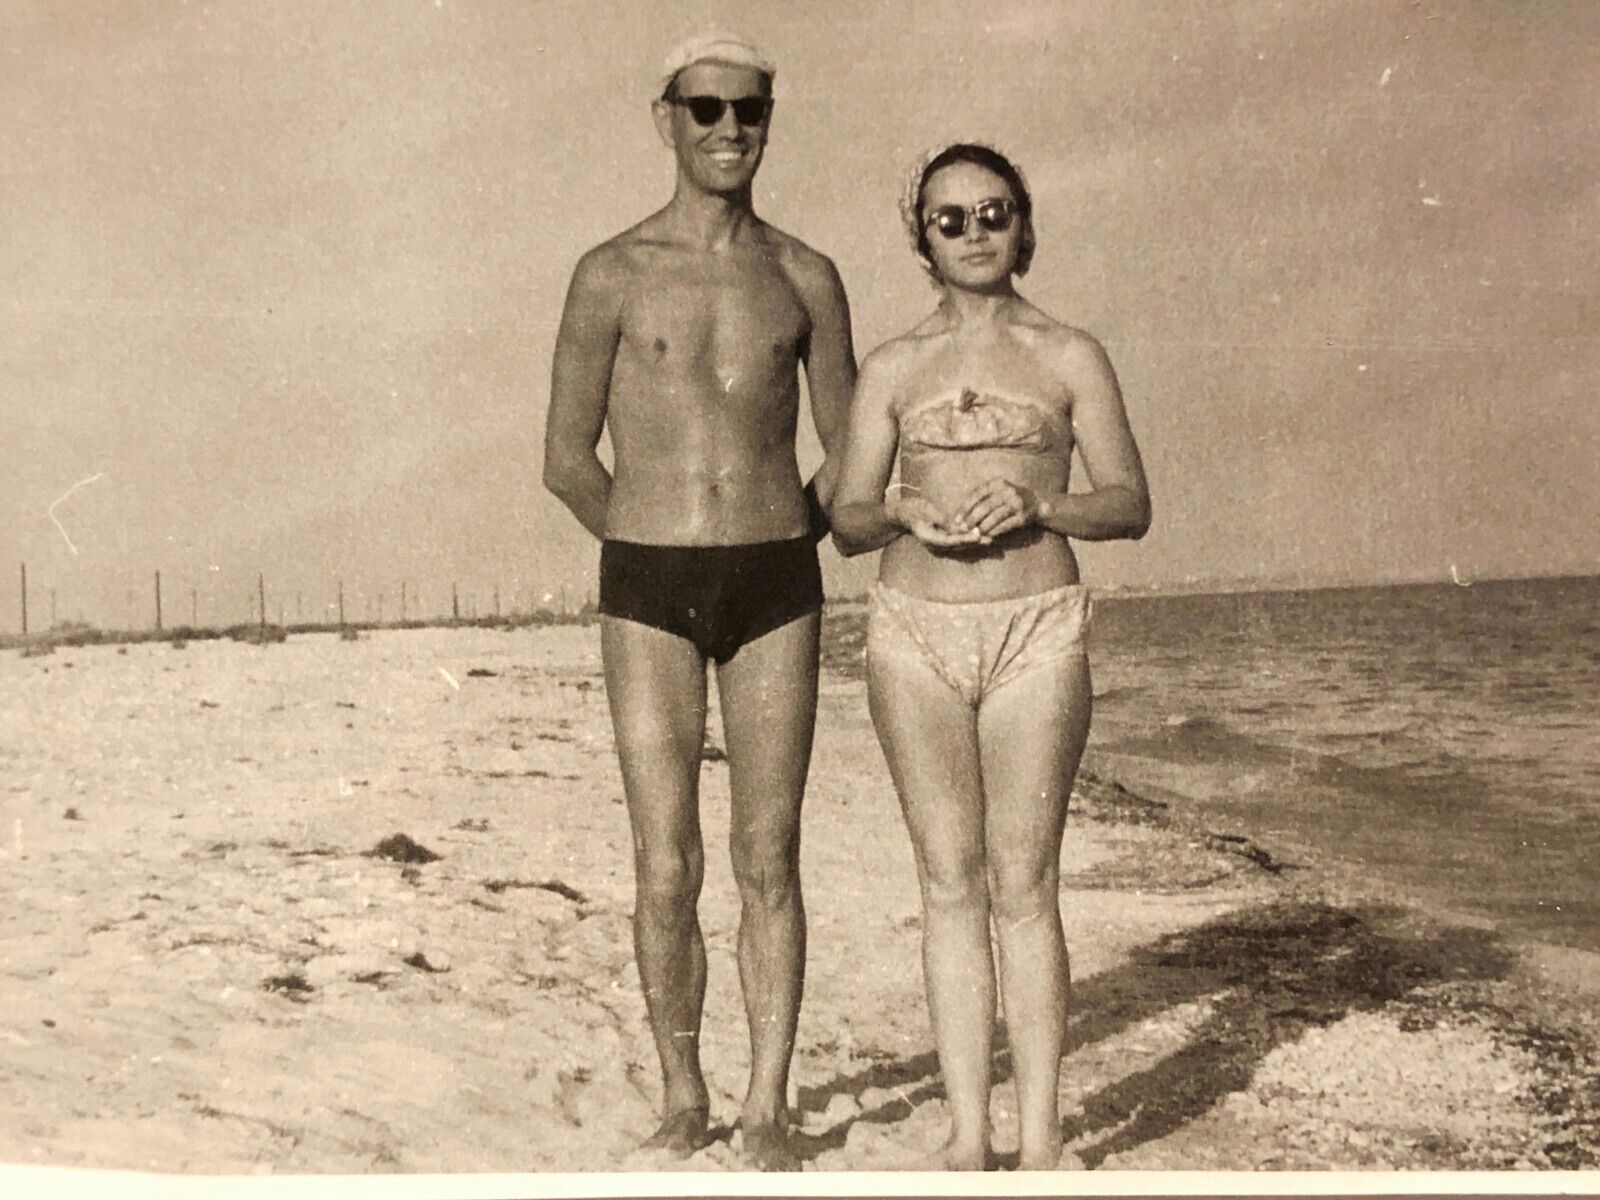 1950s Shirtless Handsome Man Bulge Trunks and Woman Gay int Vintage Photo